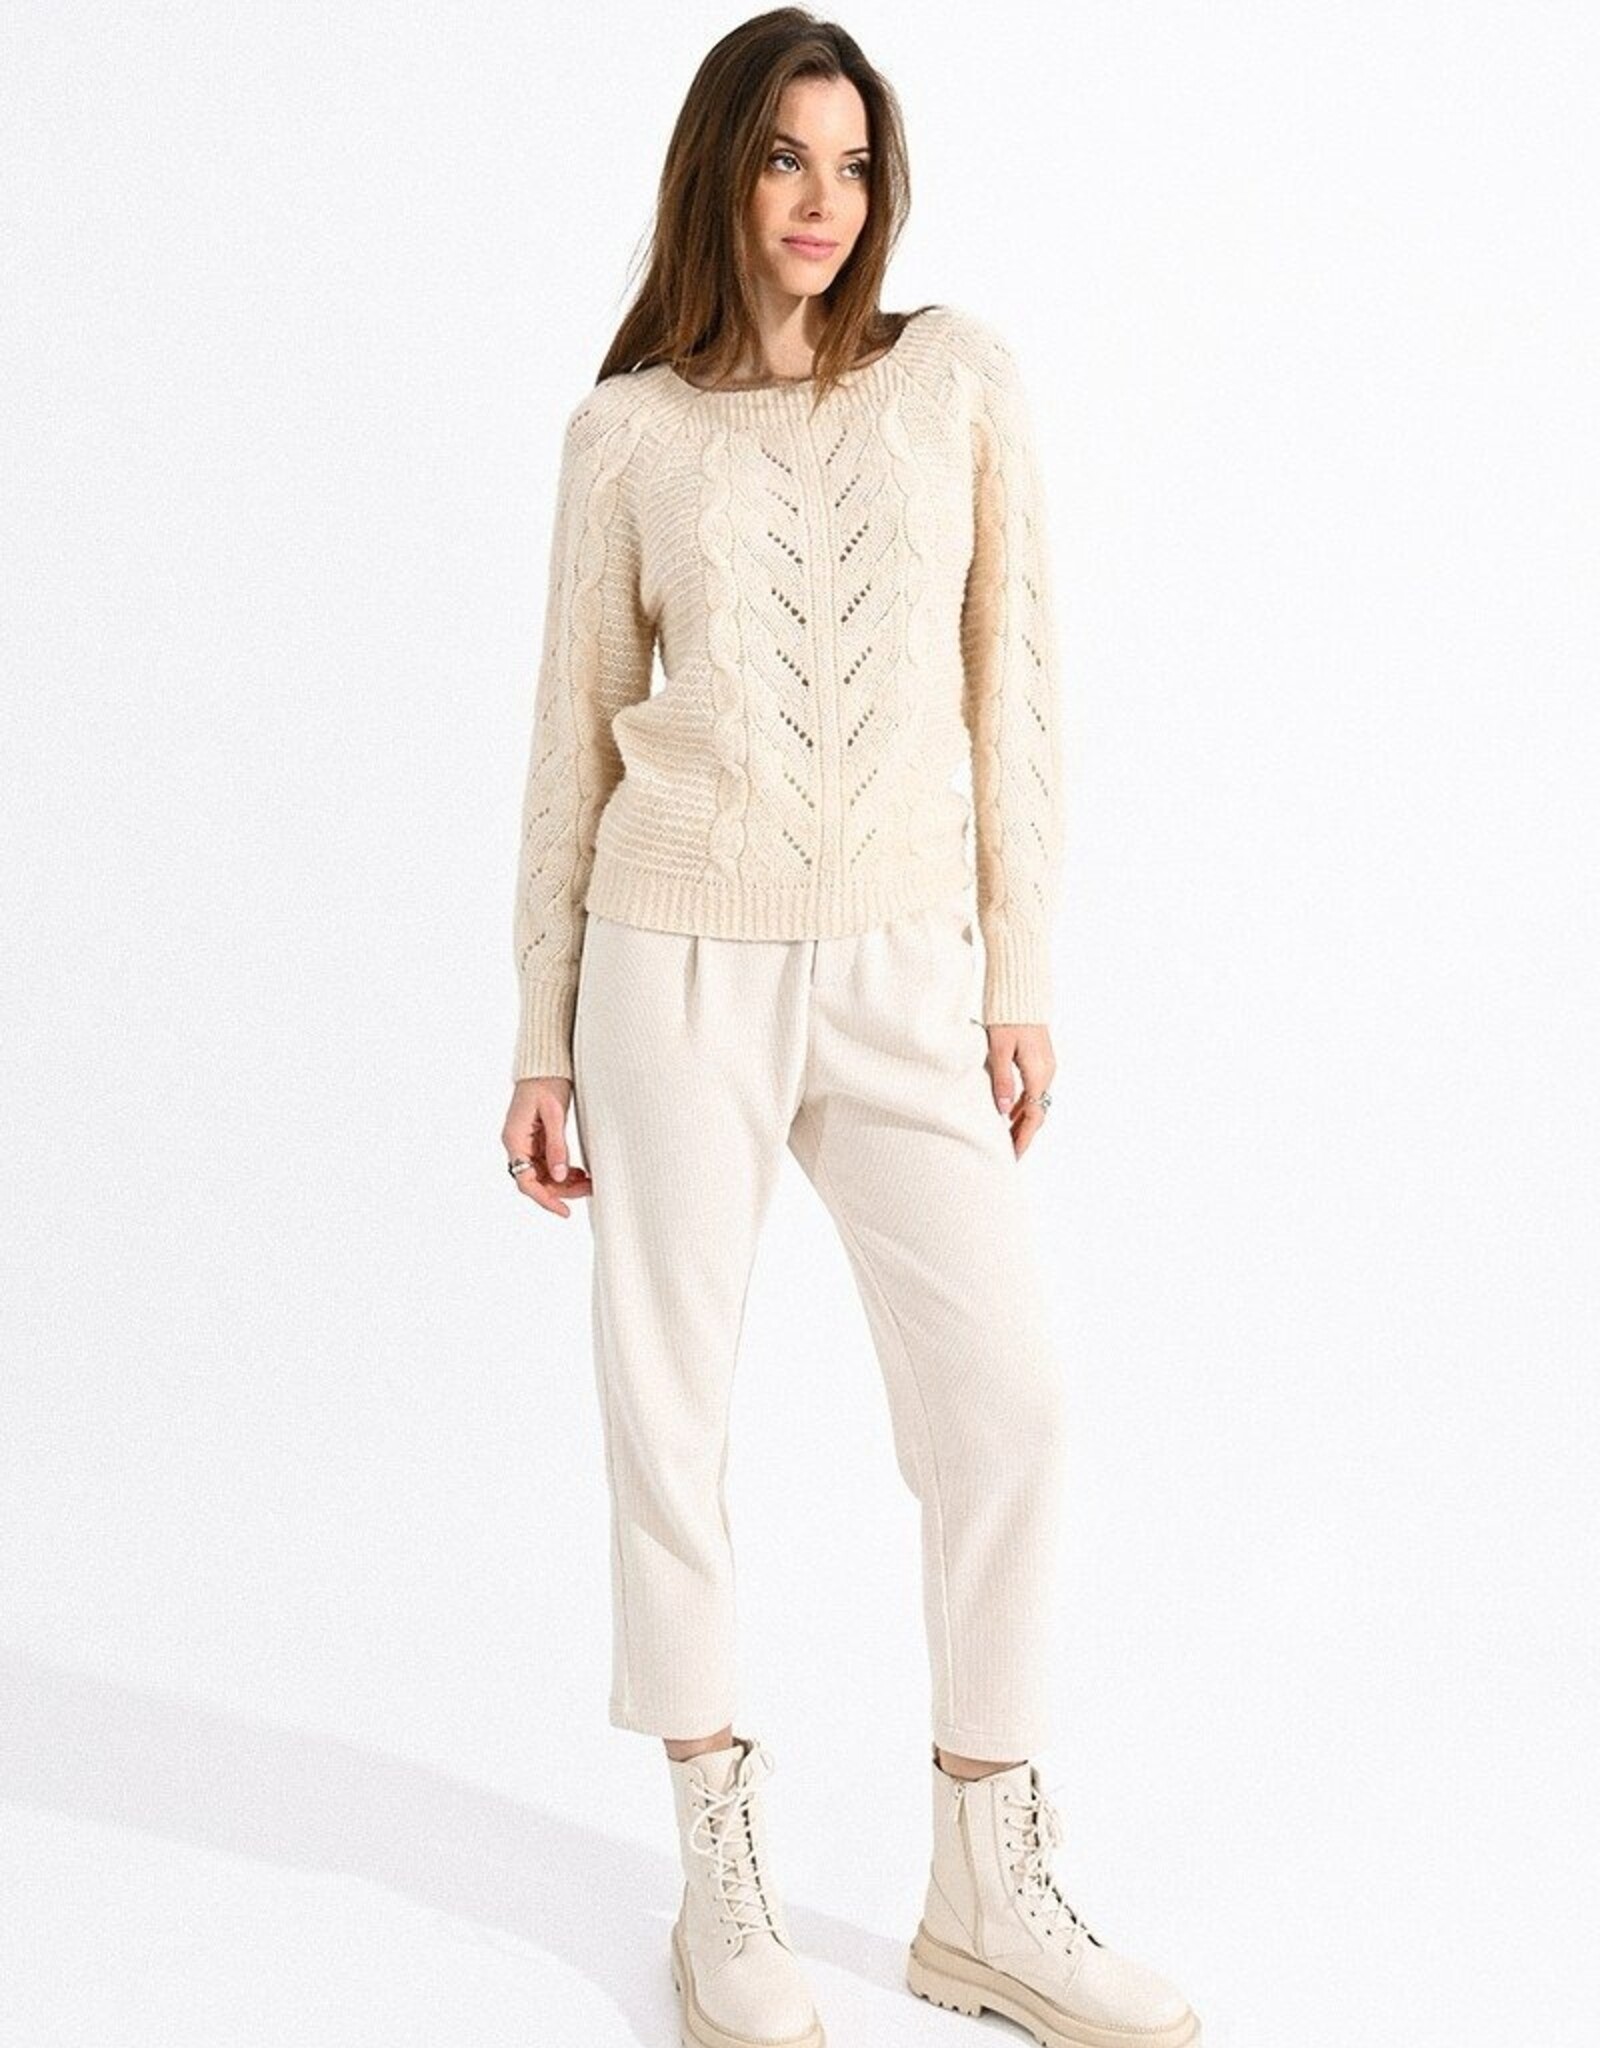 Molly Bracken Cable Knit Sq Neck Sweater